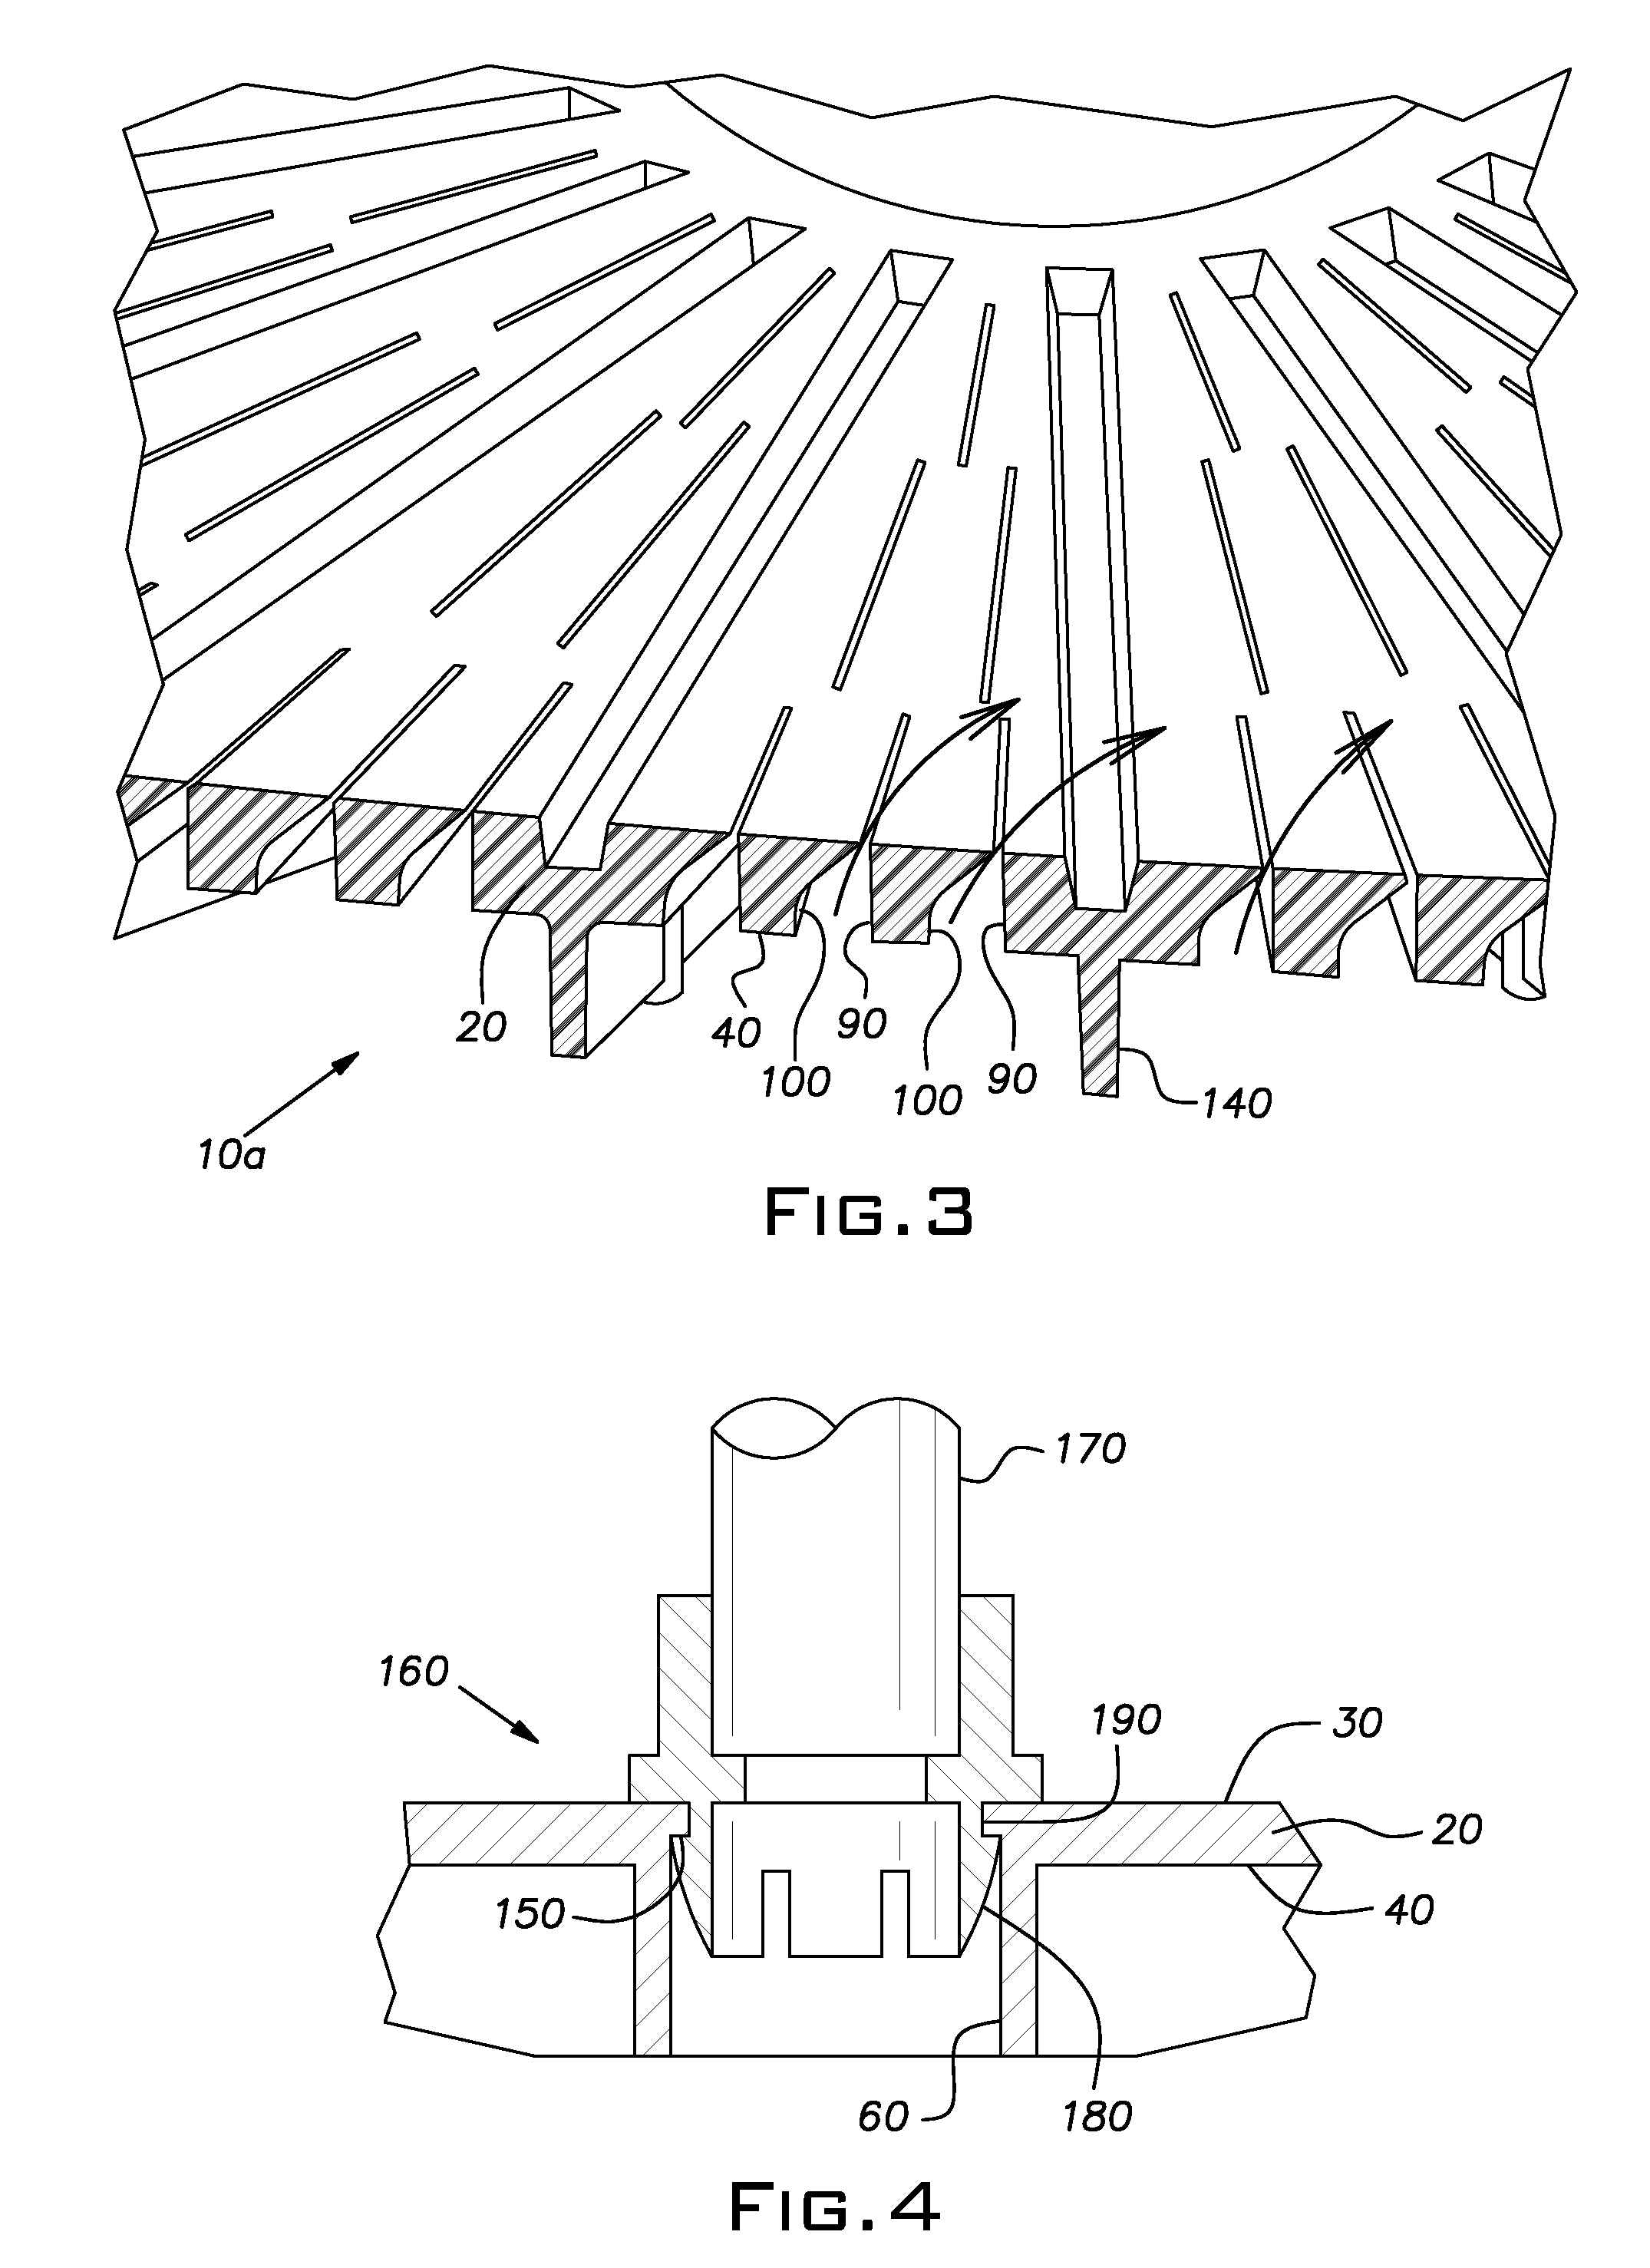 Distributor plates for composite pressure vessel assemblies and methods